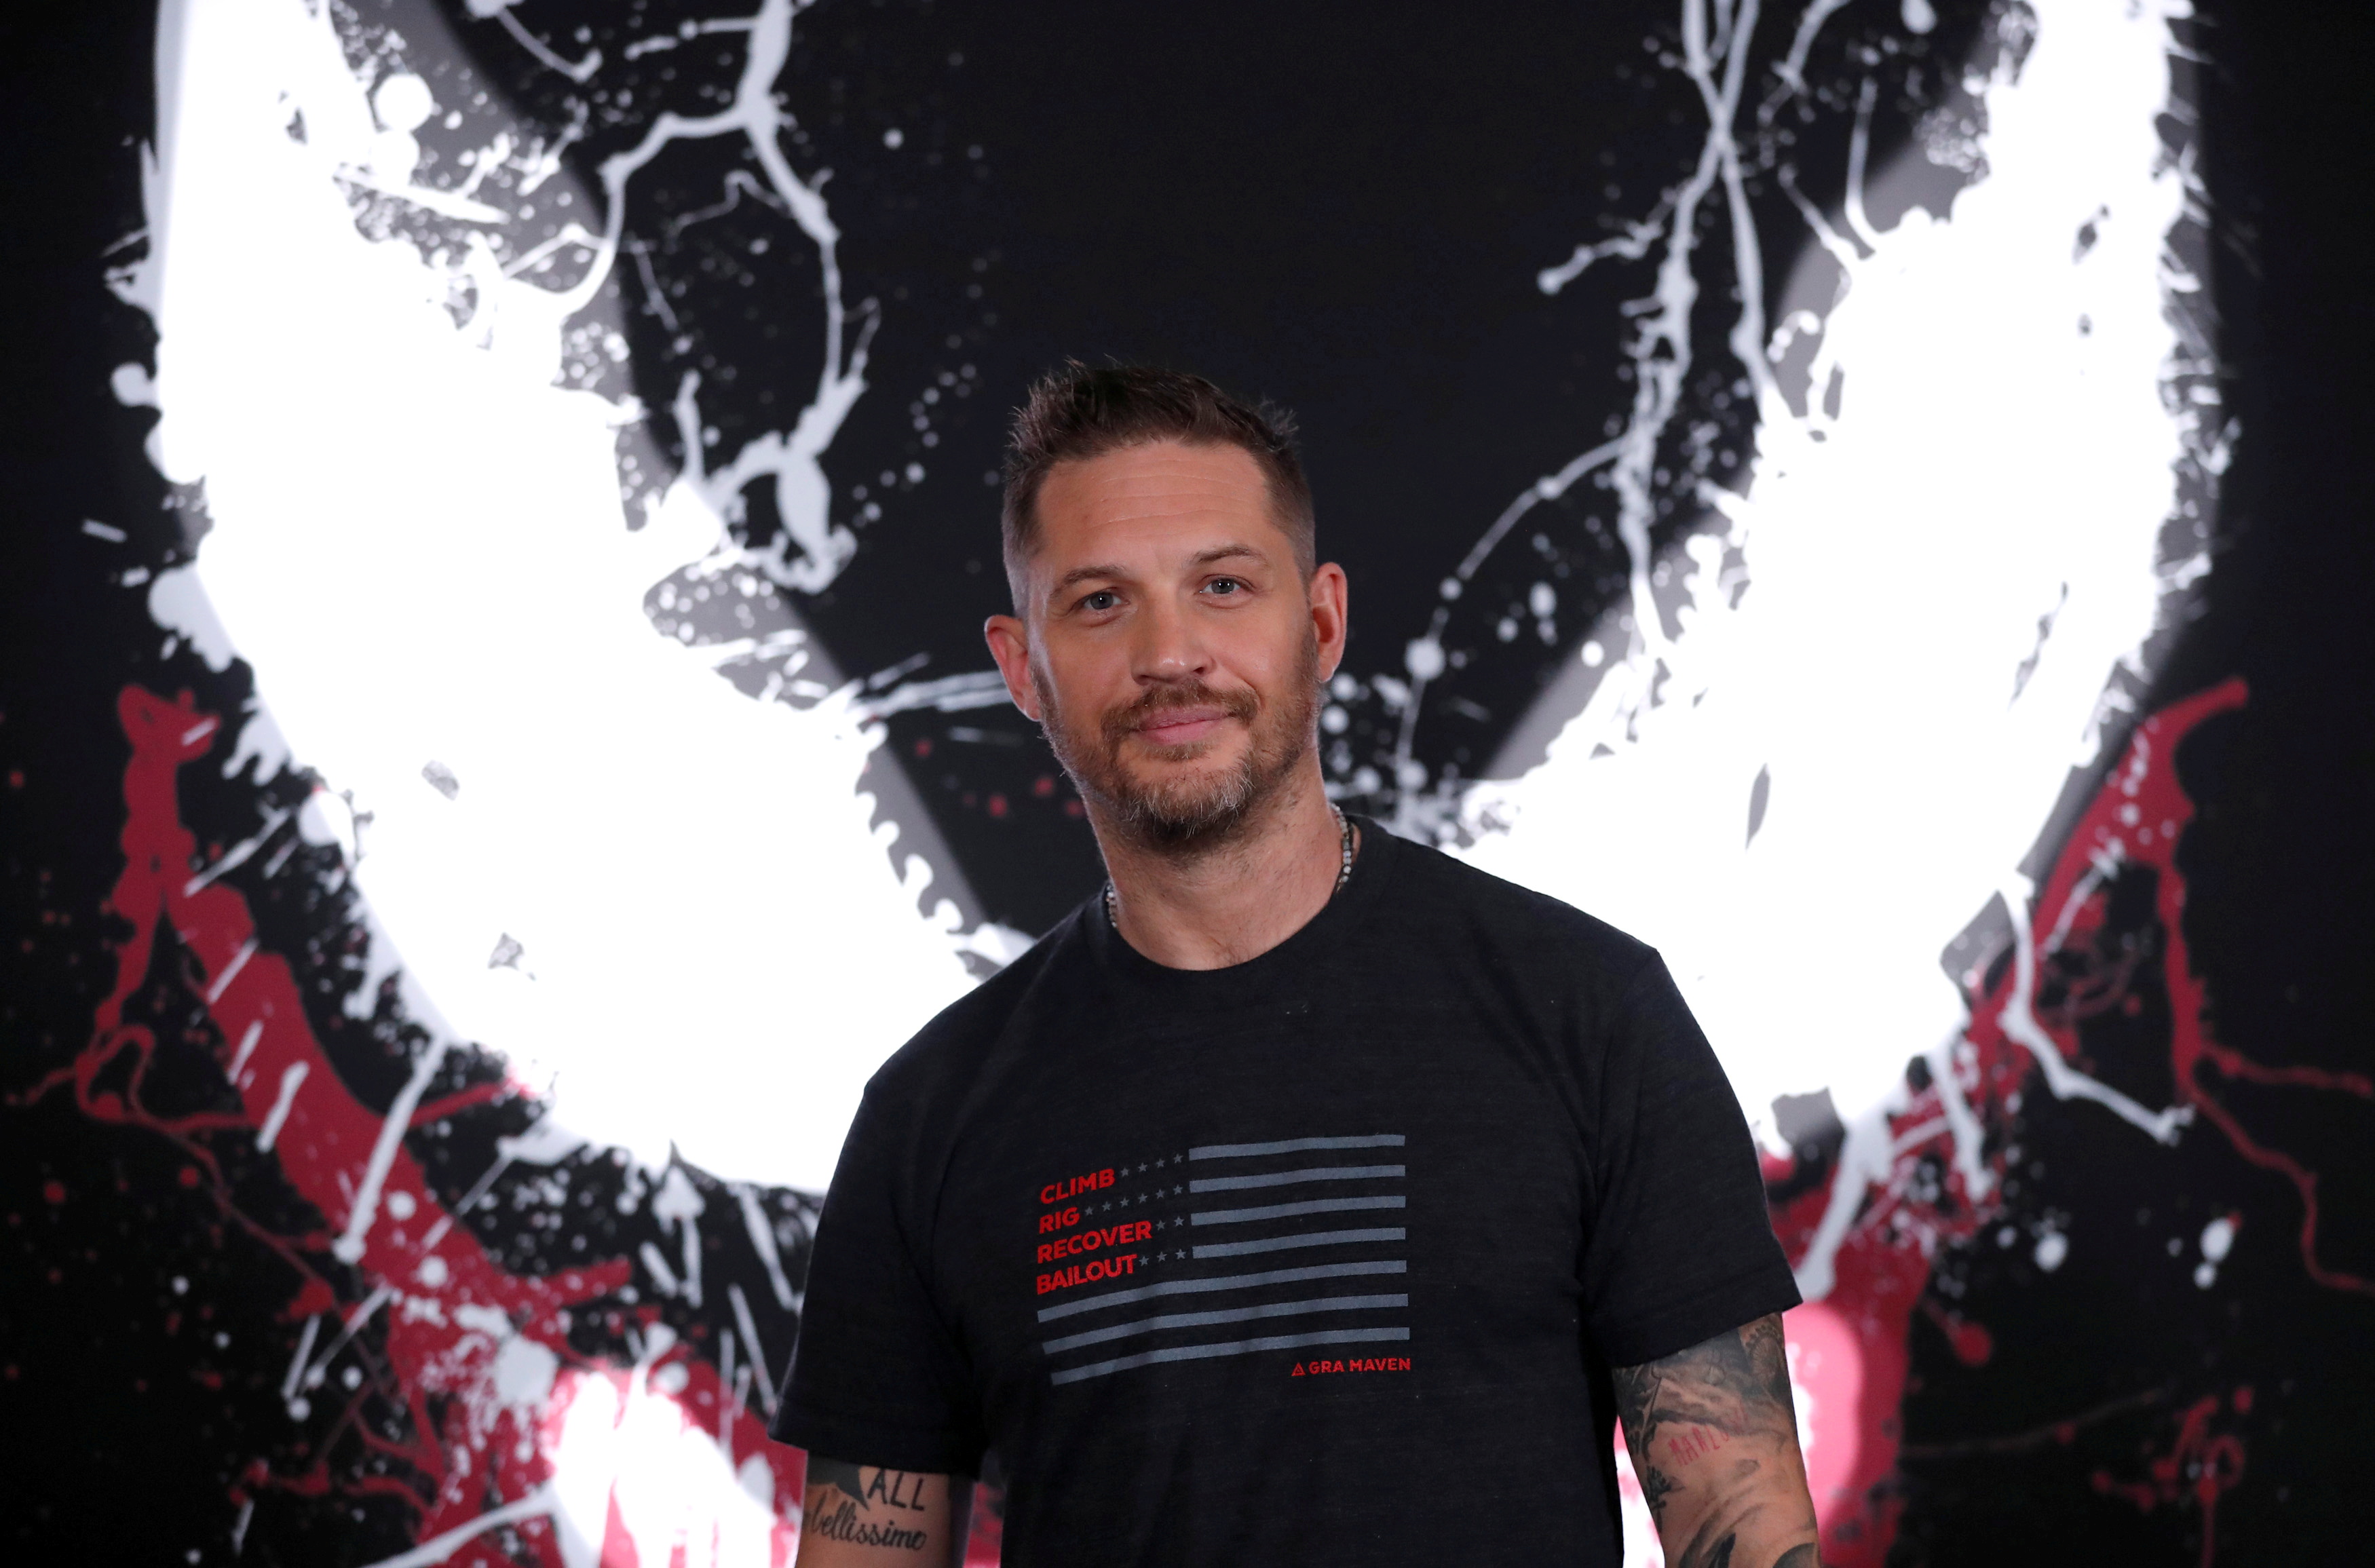 Cast member Tom Hardy poses at a photocall for the film "Venom" in Los Angeles, California, the United States, in September 2018. (REUTERS)